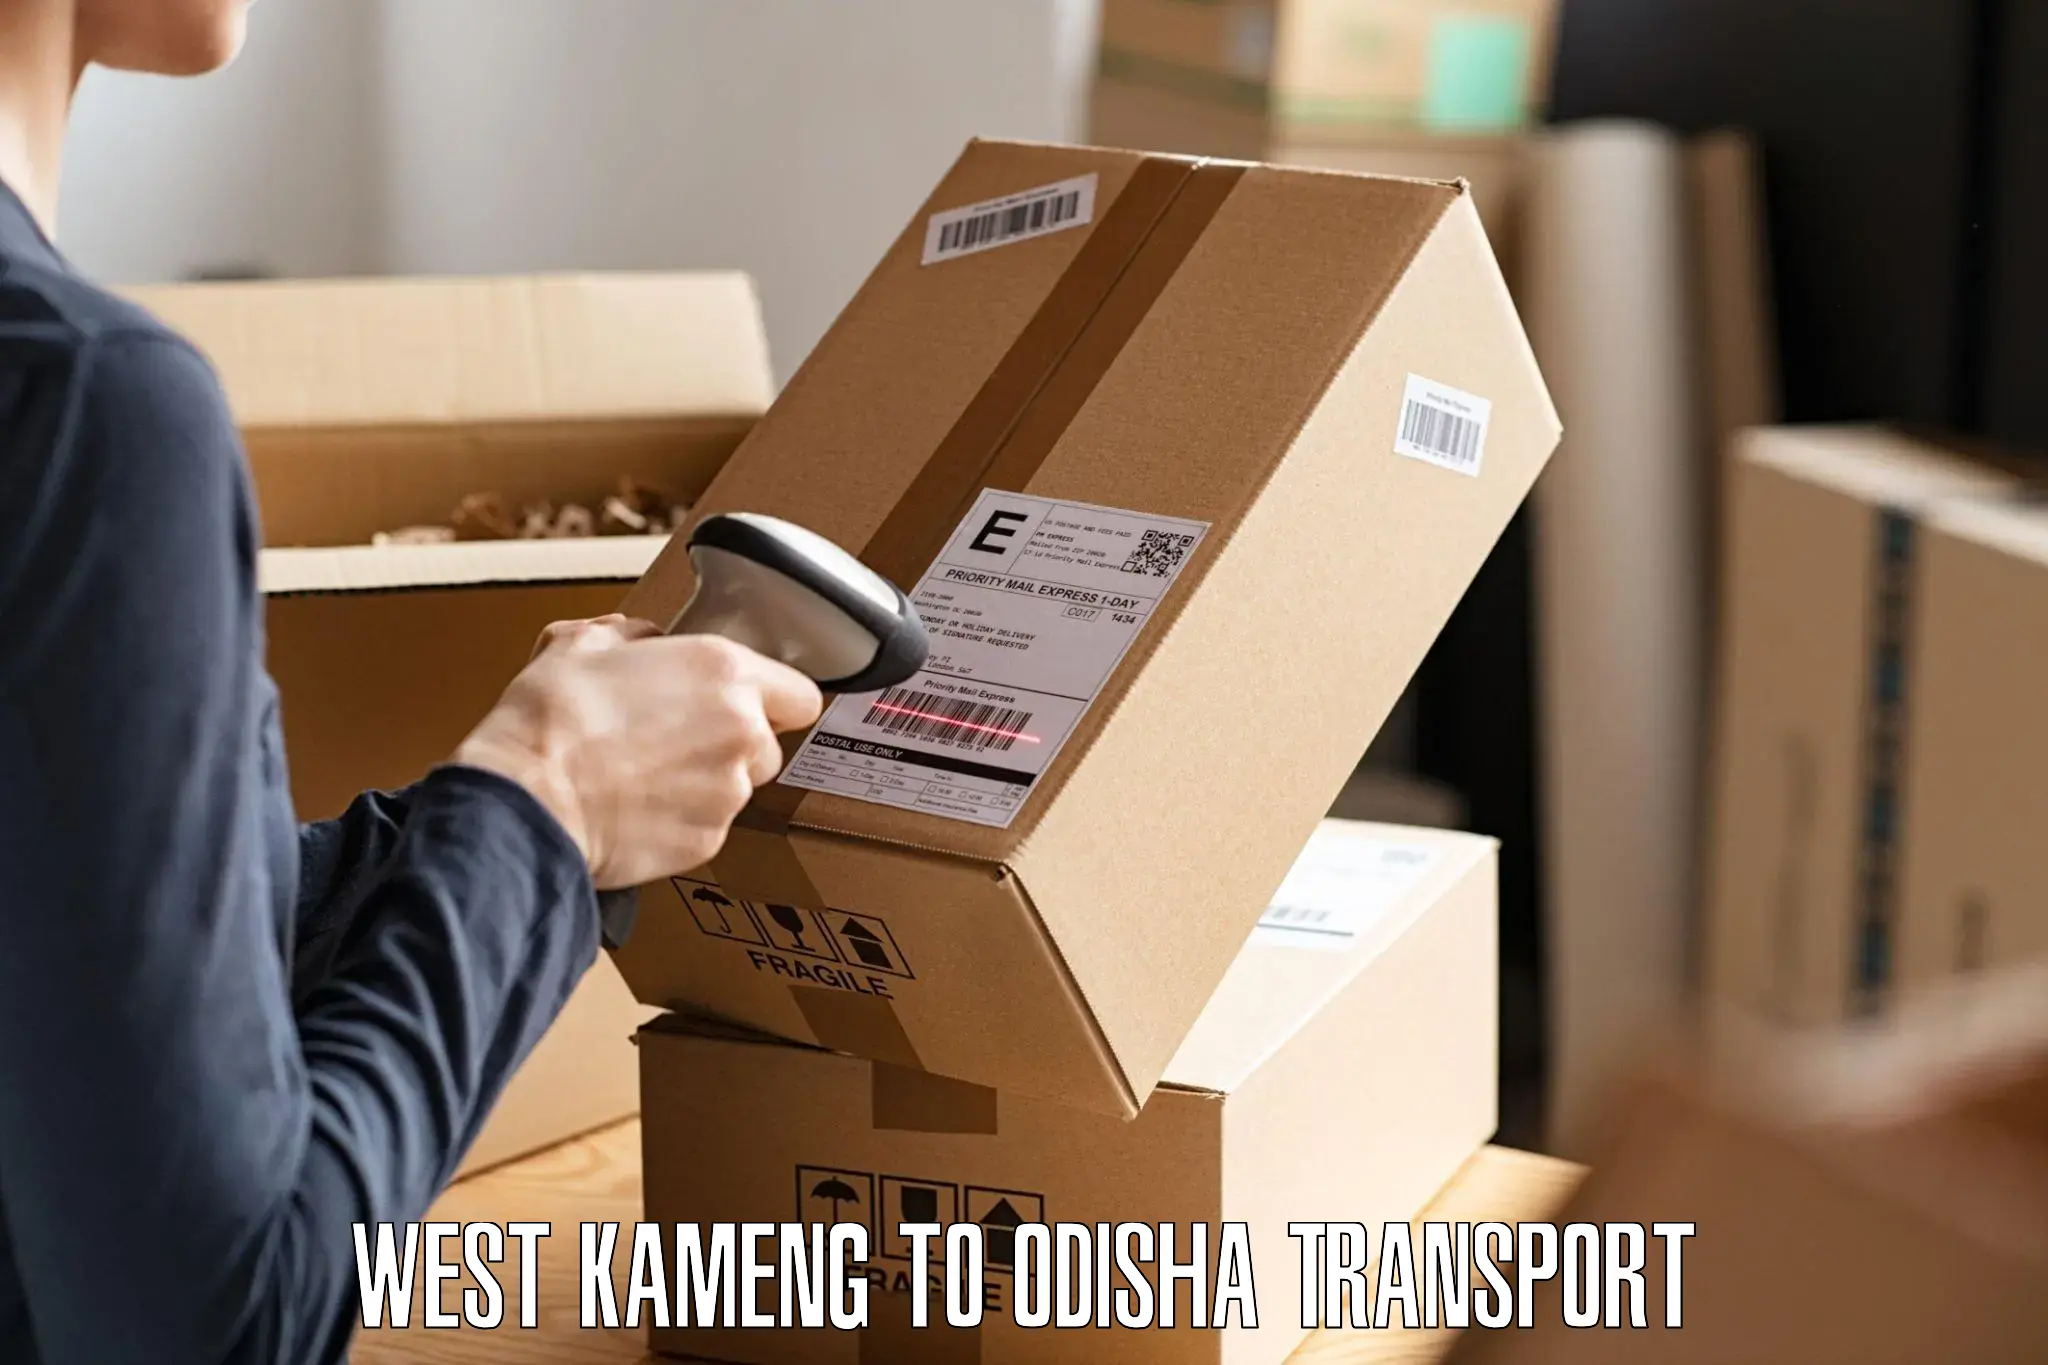 Daily transport service West Kameng to Loisingha